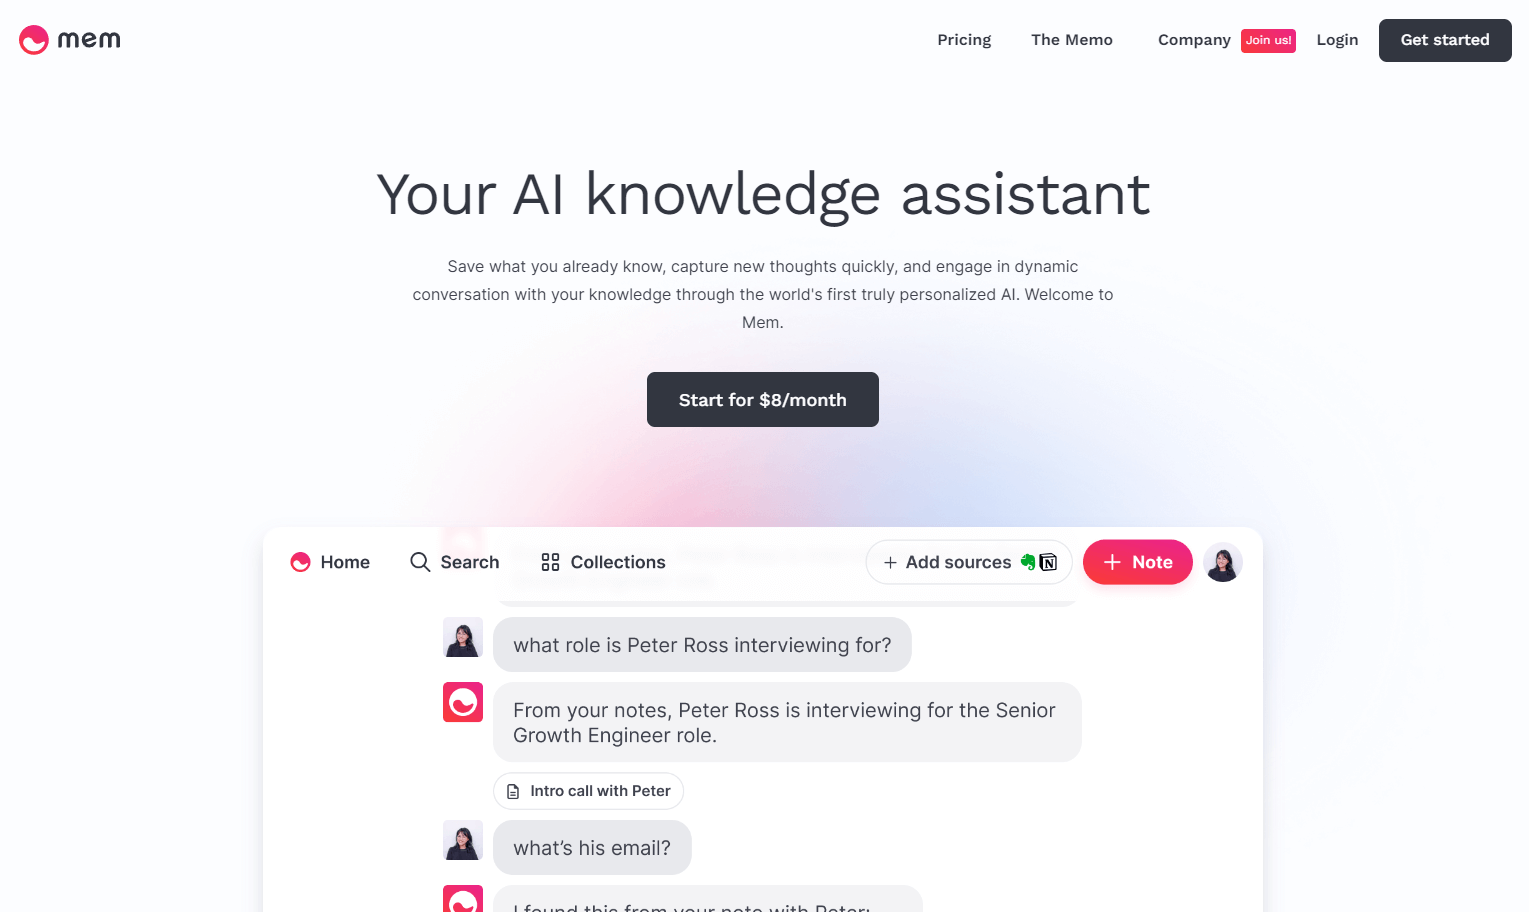 Create and interact with your personal knowledge base using AI